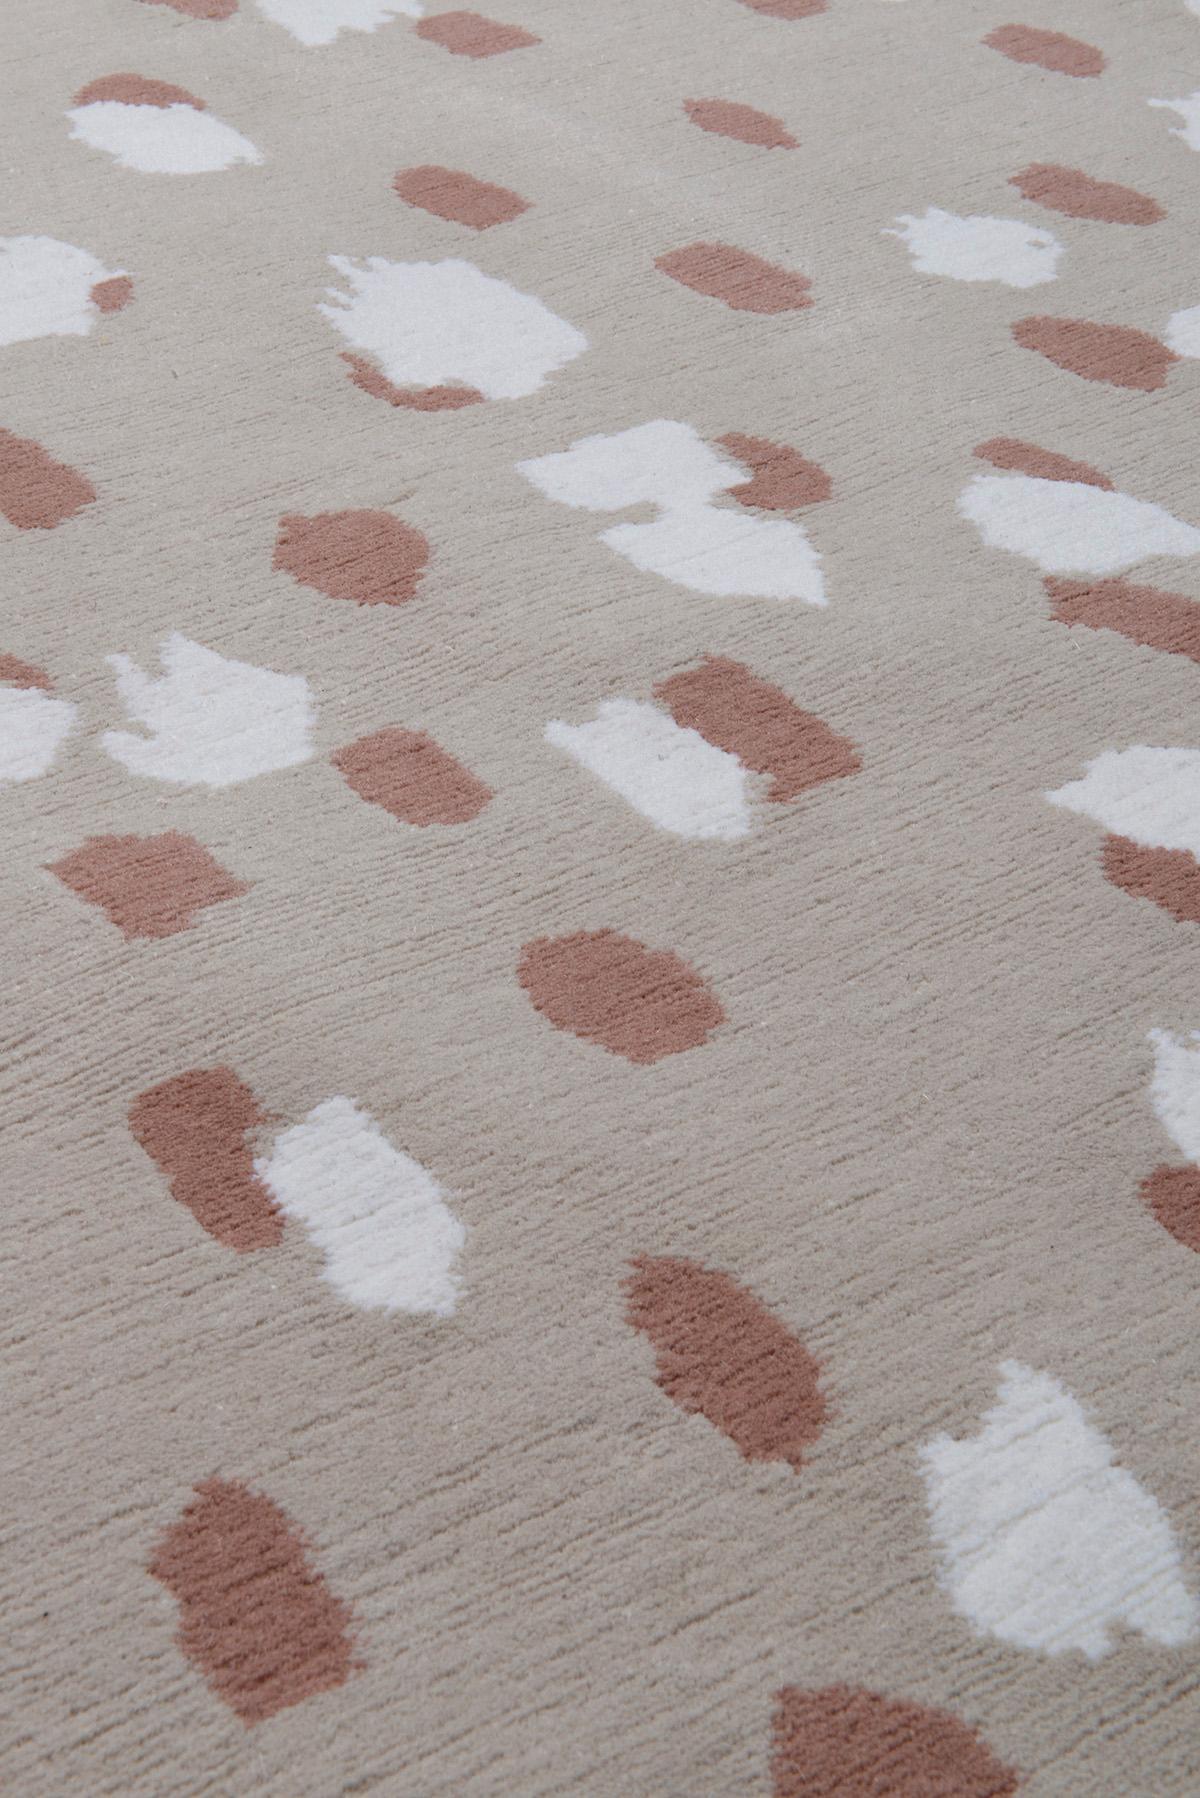 Dapple Rose rug features modest wool markings, which are orchestrated by colour into distinct sections of the rug. The composition of this design is concealed by a veil of identical markings, crafted in opposing techniques to subtly mask the